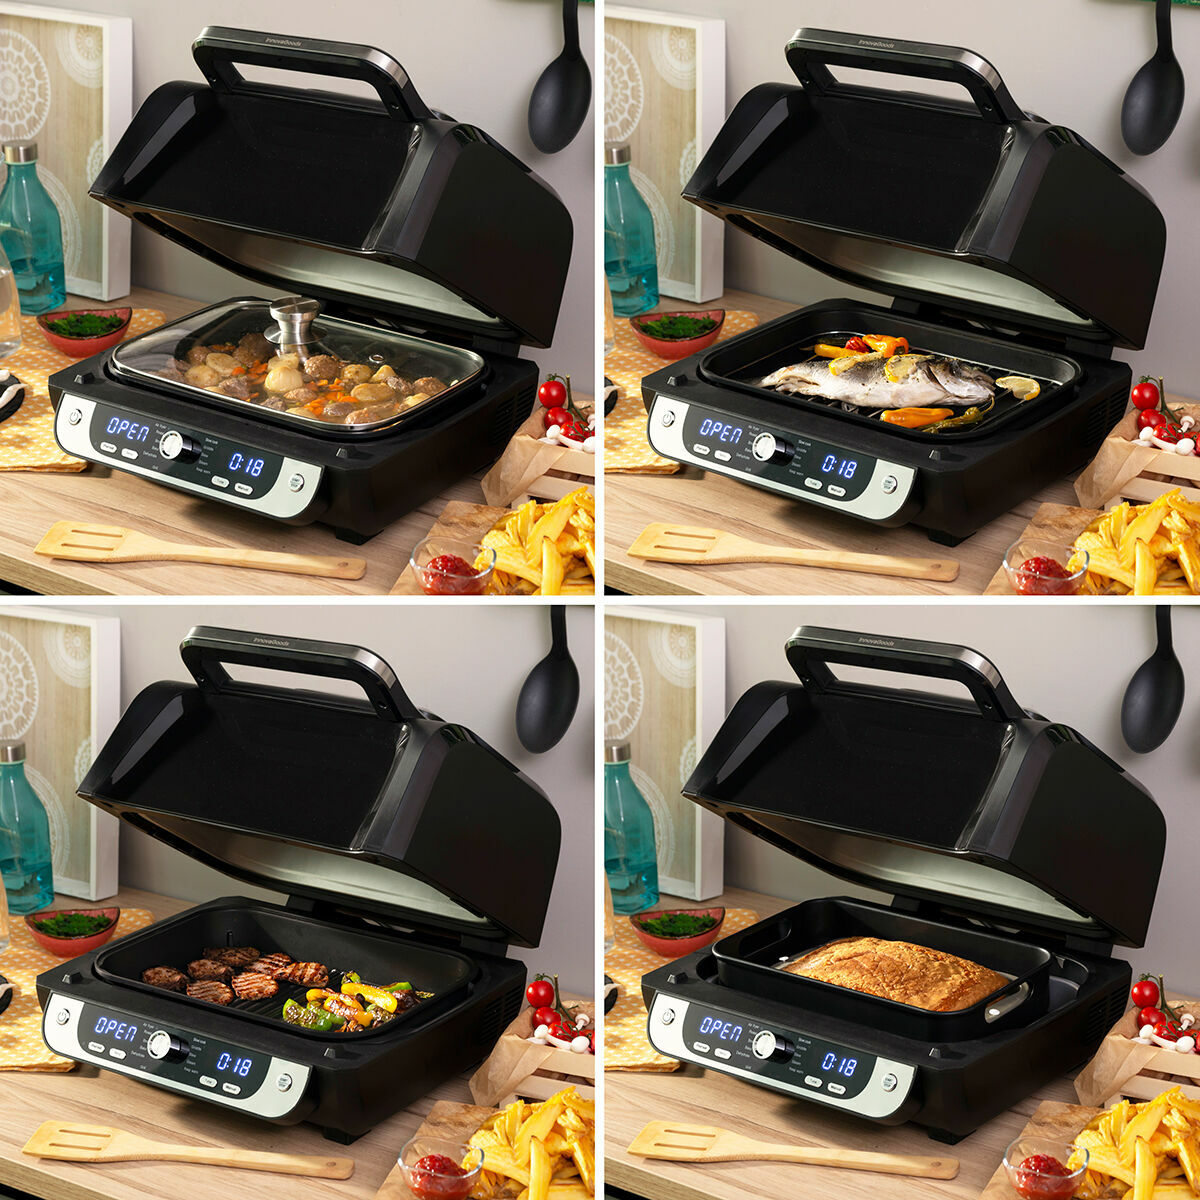 Air Fryer with Grill, Accessories and Recipe Book InnovaGoods Black Steel 3400 W 6 L (Refurbished B)